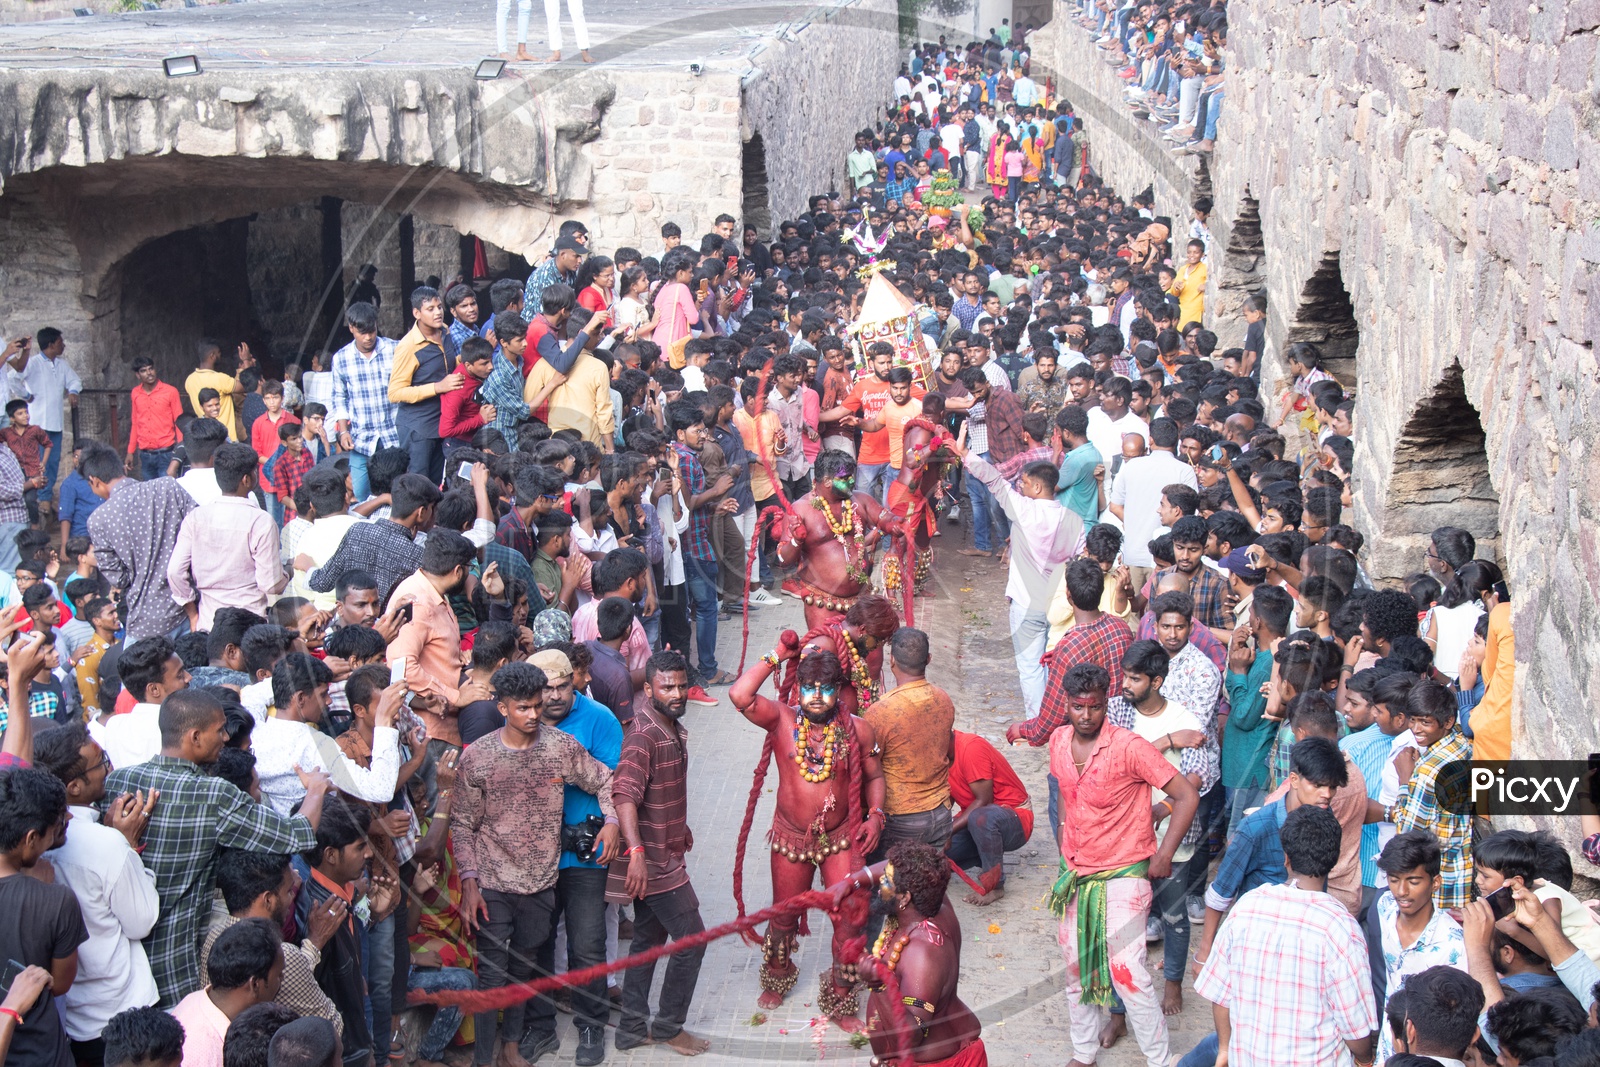 Pothuraju Surrounded By Crowd During Bonalu Festival Celebrations At Golconda Fort